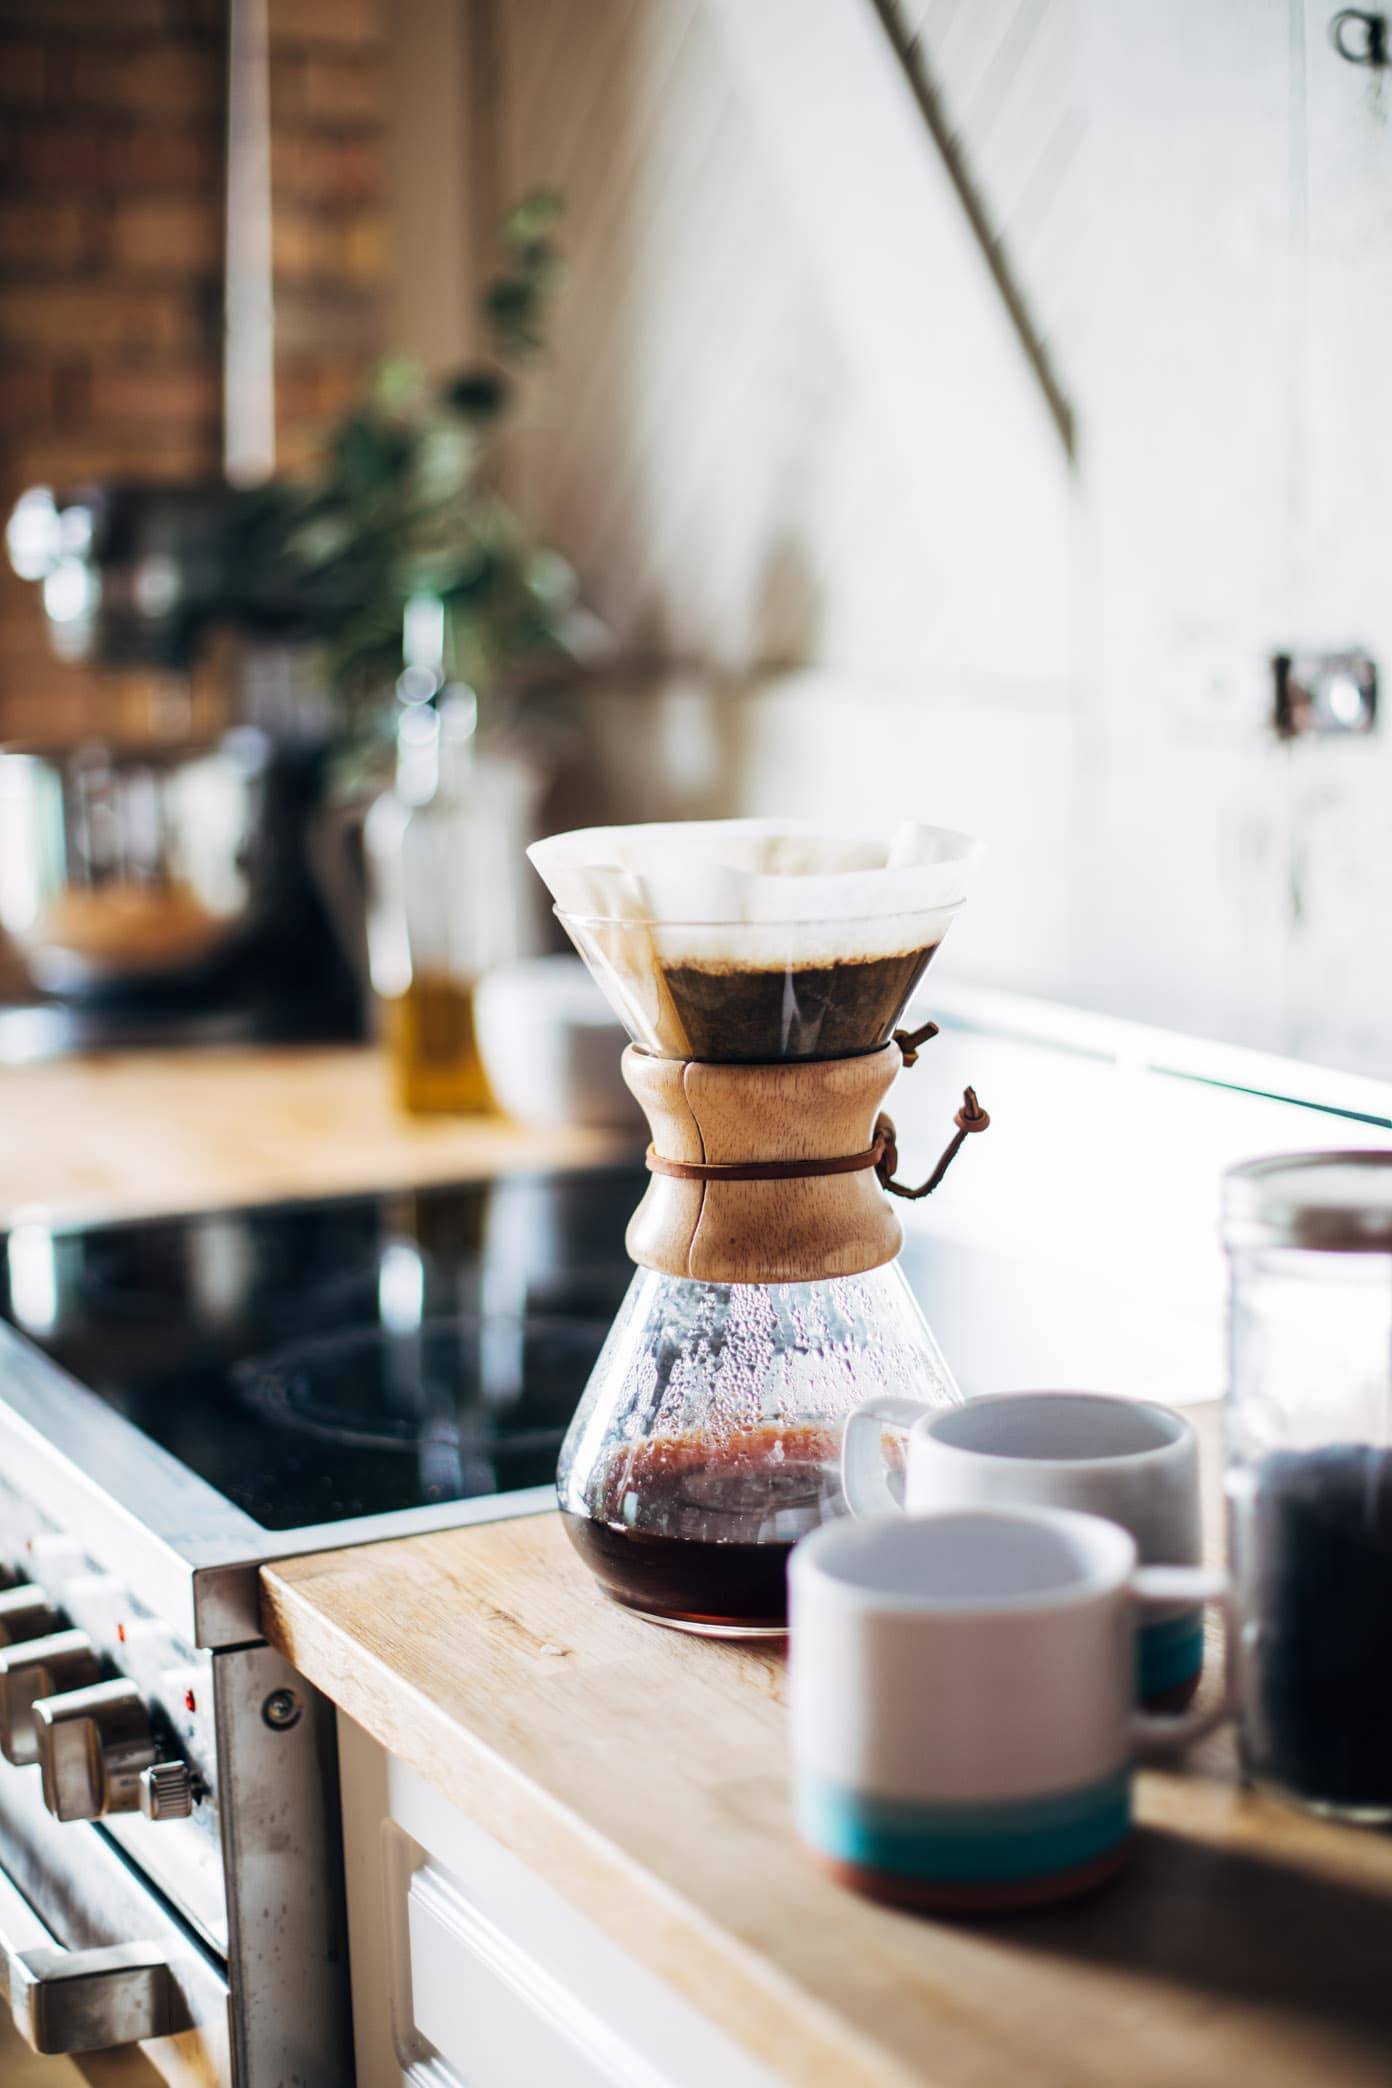 Chemex coffee maker on a counter.